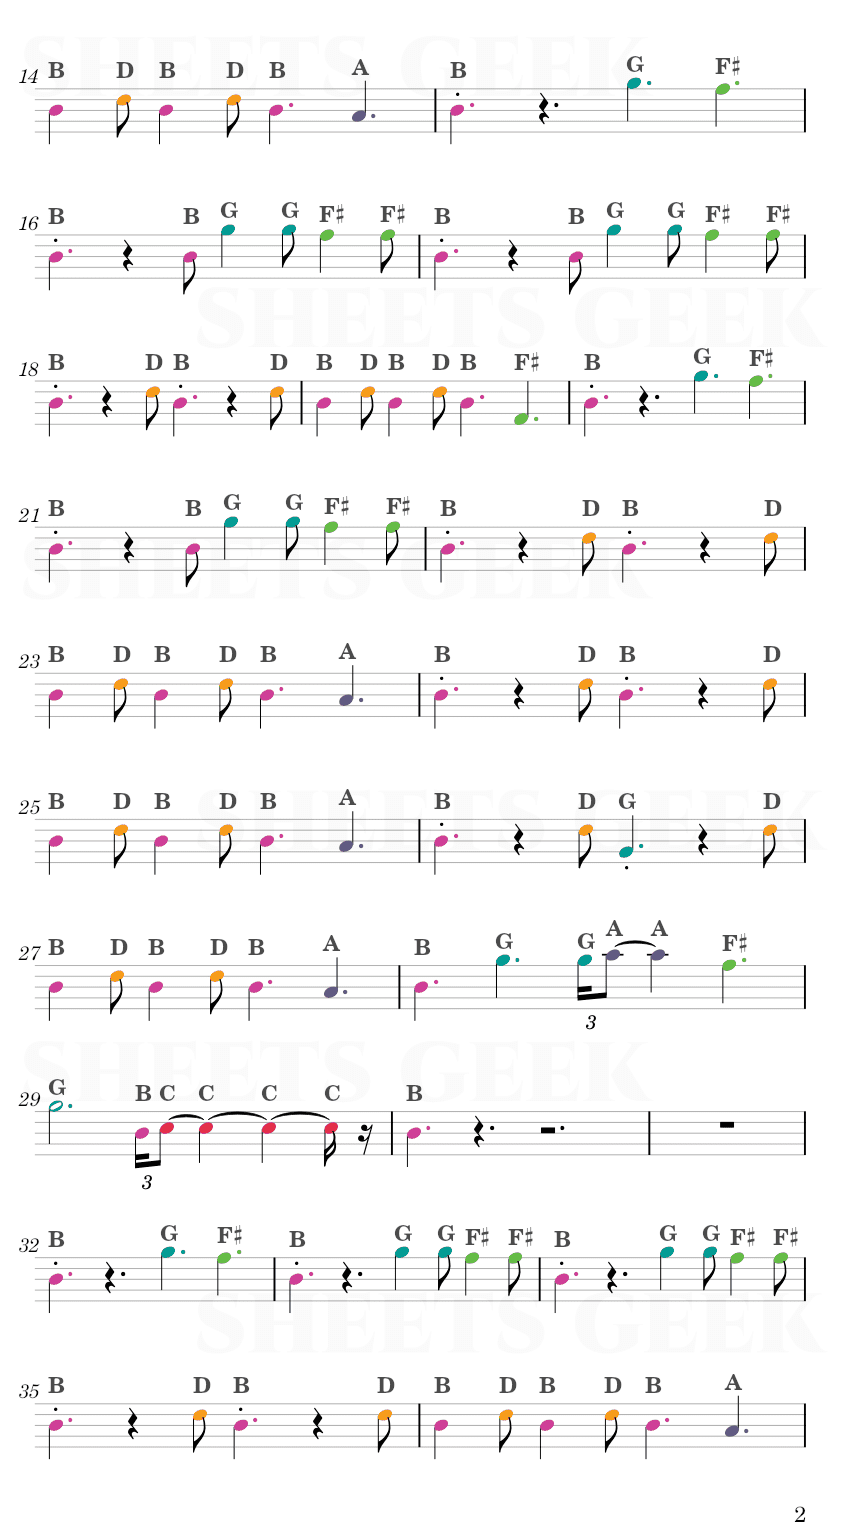 My Alcoholic Friends - The Dresden Dolls Easy Sheet Music Free for piano, keyboard, flute, violin, sax, cello page 2